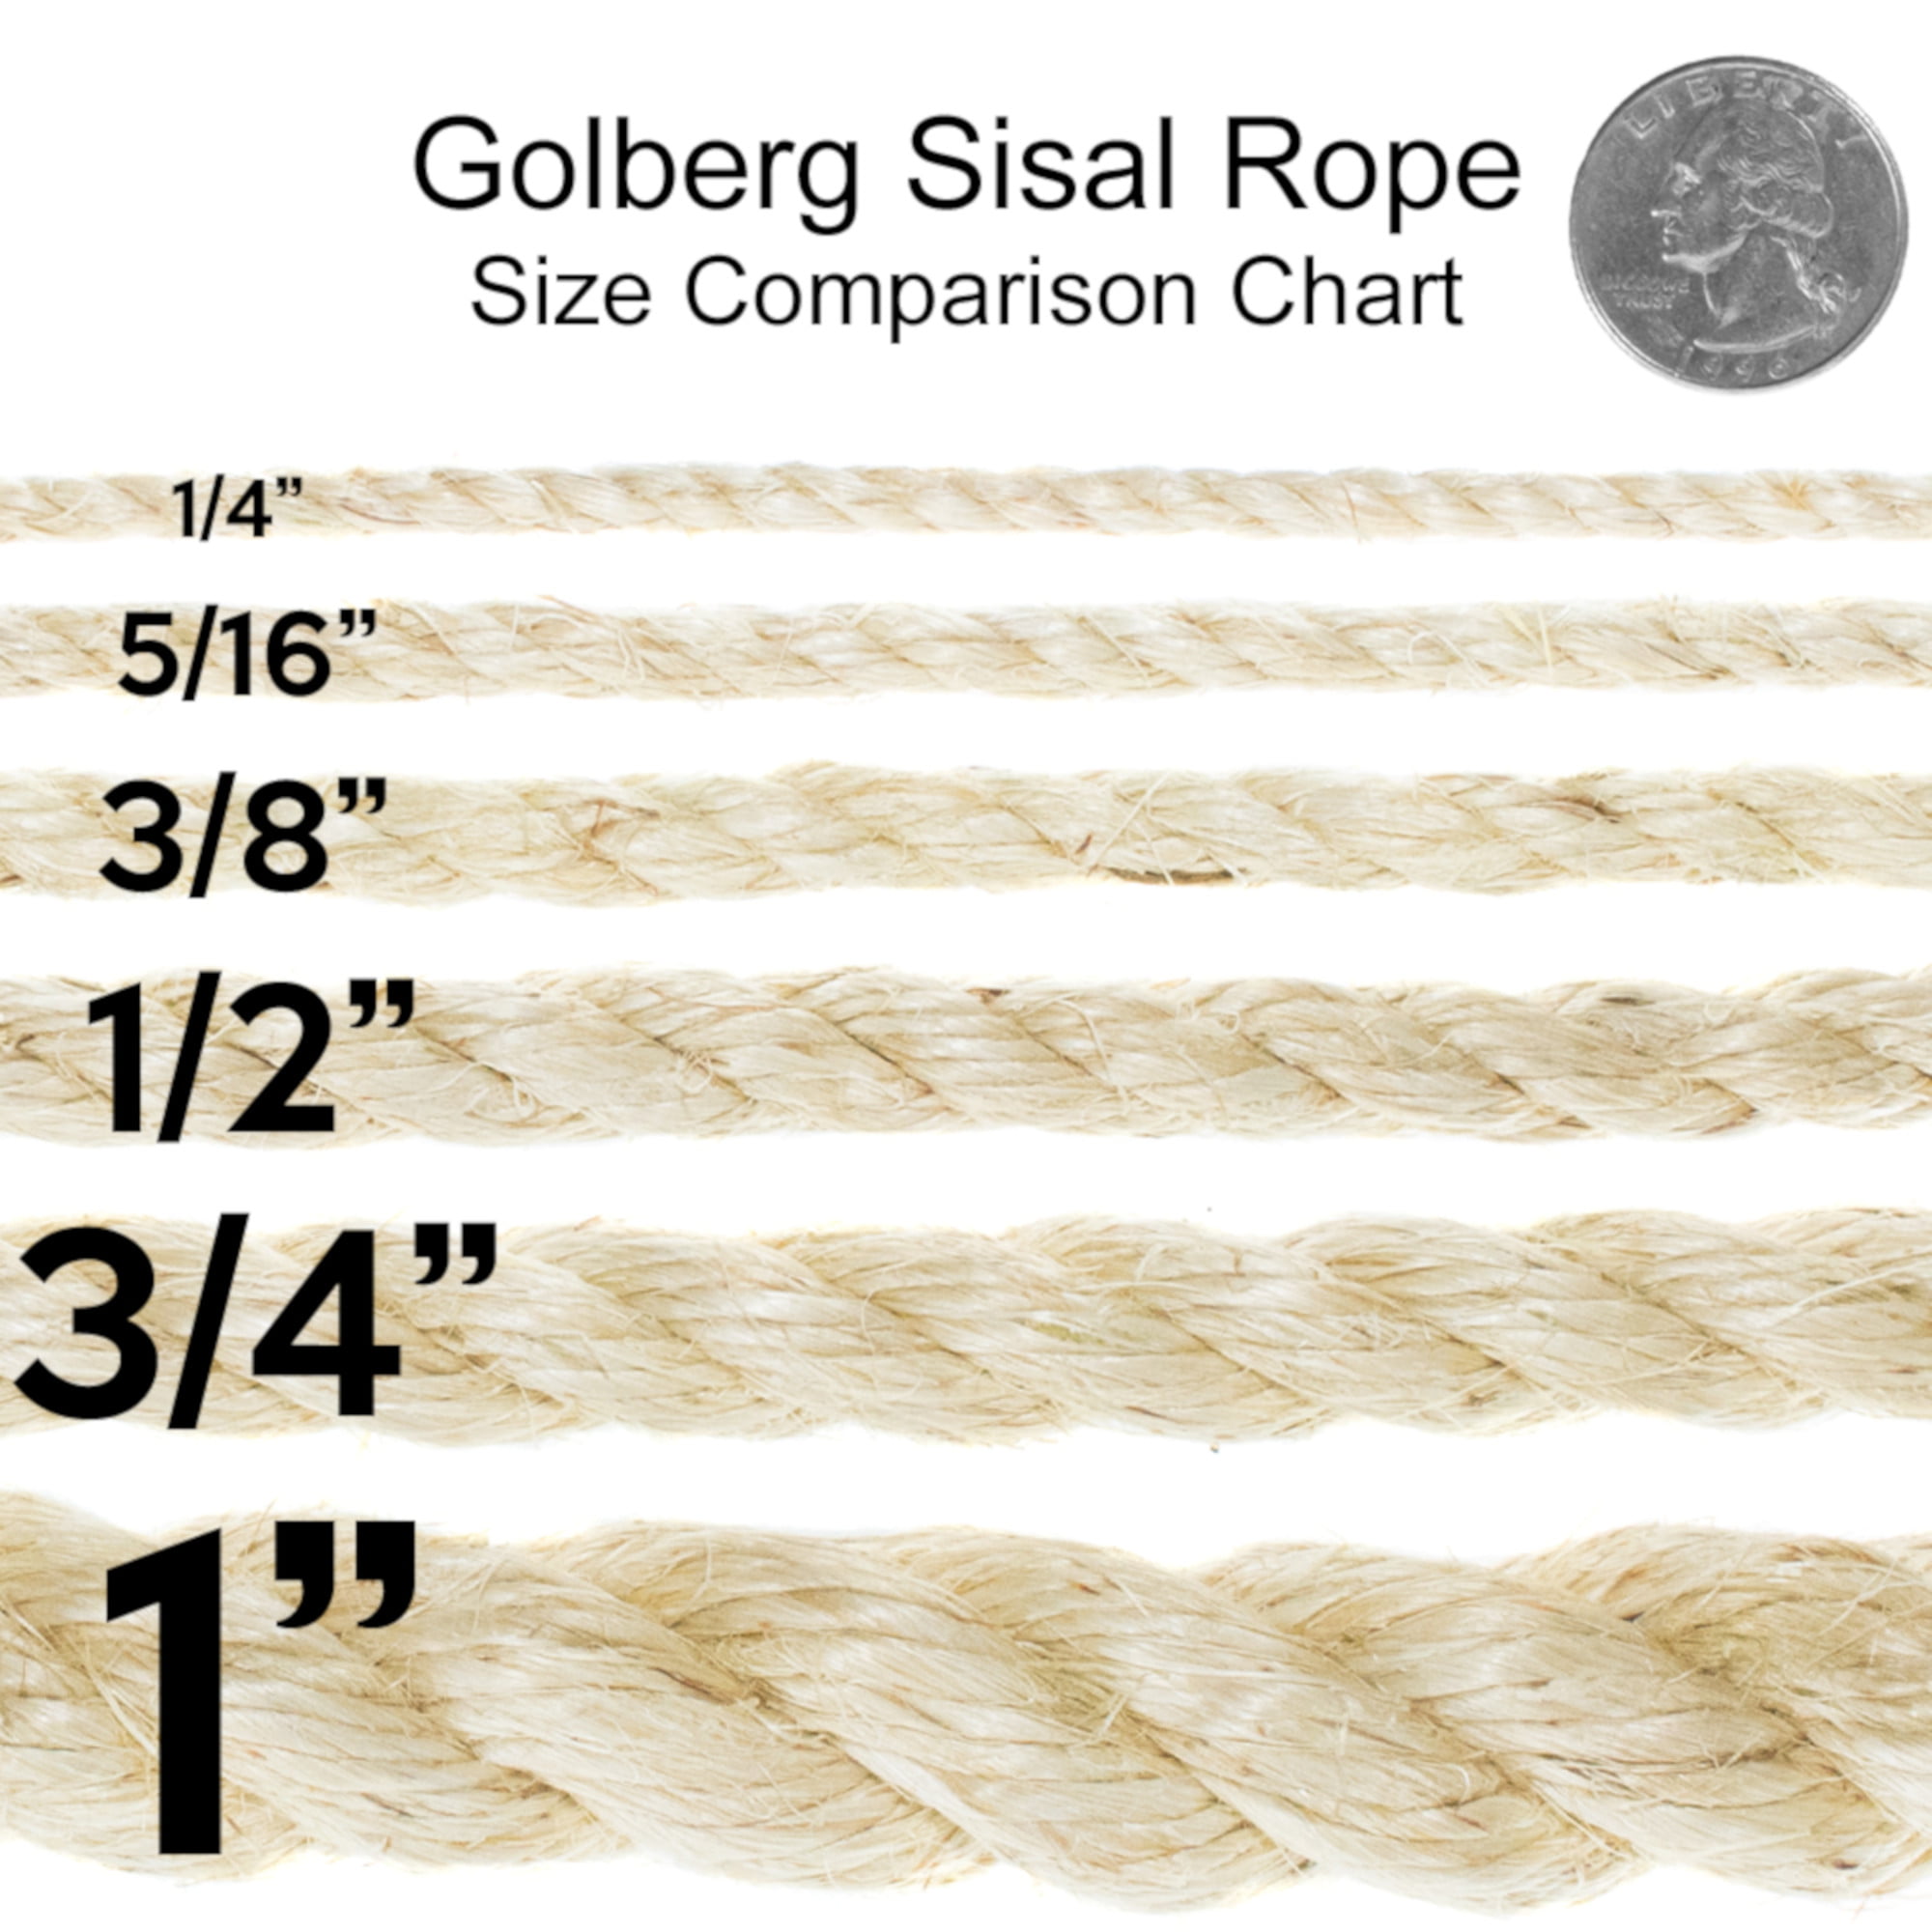 1/2 Golberg Twisted Sisal Rope Available in 1/4 3/8 3/4 and 1-inch Diameters in Various Lengths 5/16 